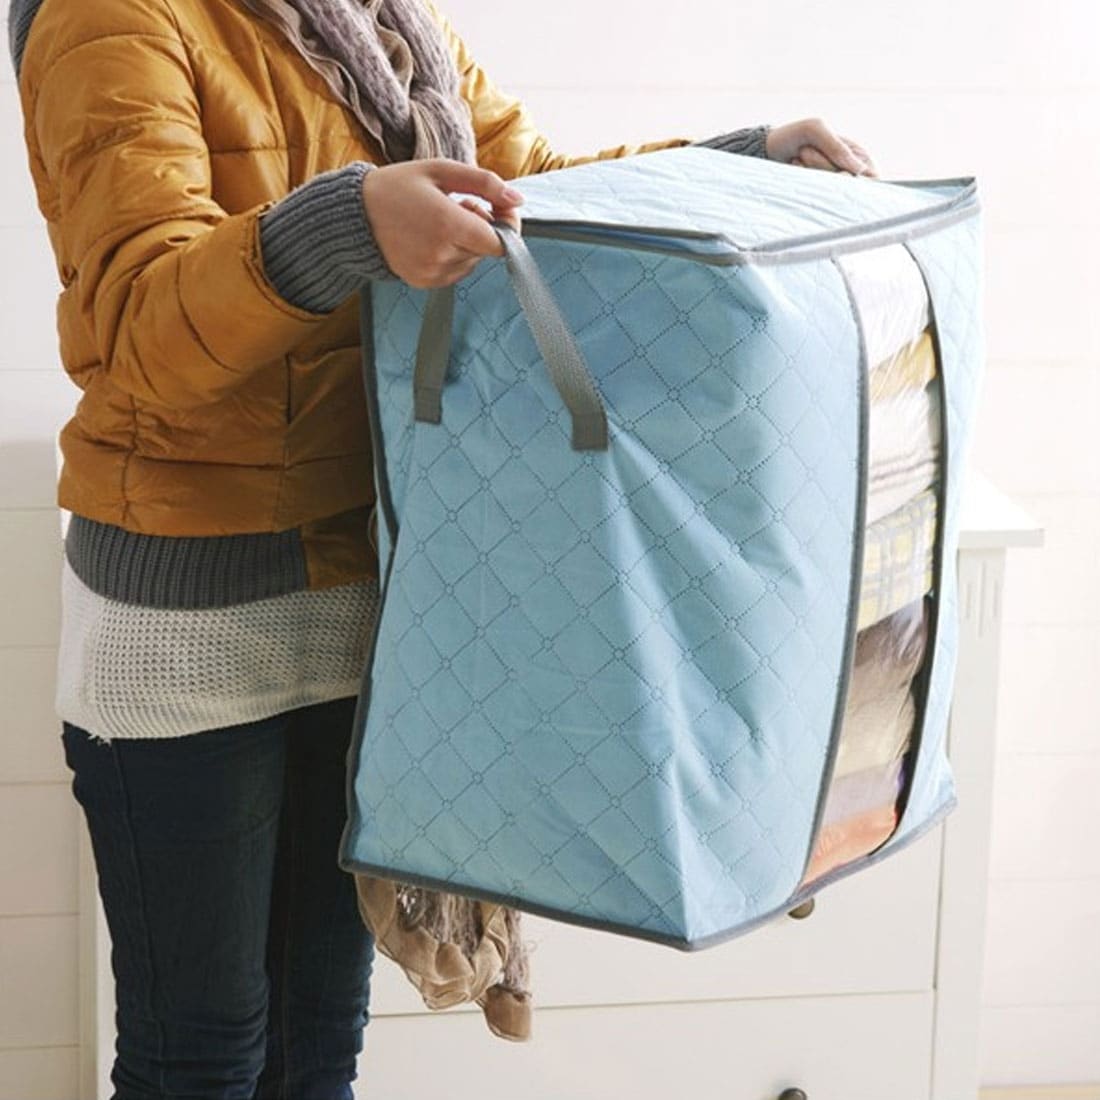 https://ak1.ostkcdn.com/images/products/is/images/direct/35b5725338fb7cad3d01578e0a575c26c2771b27/Blanket-Pillows-Quilts-Clothes-Storage-Bag-Organizer-Container-Blue-44x28x48cm.jpg